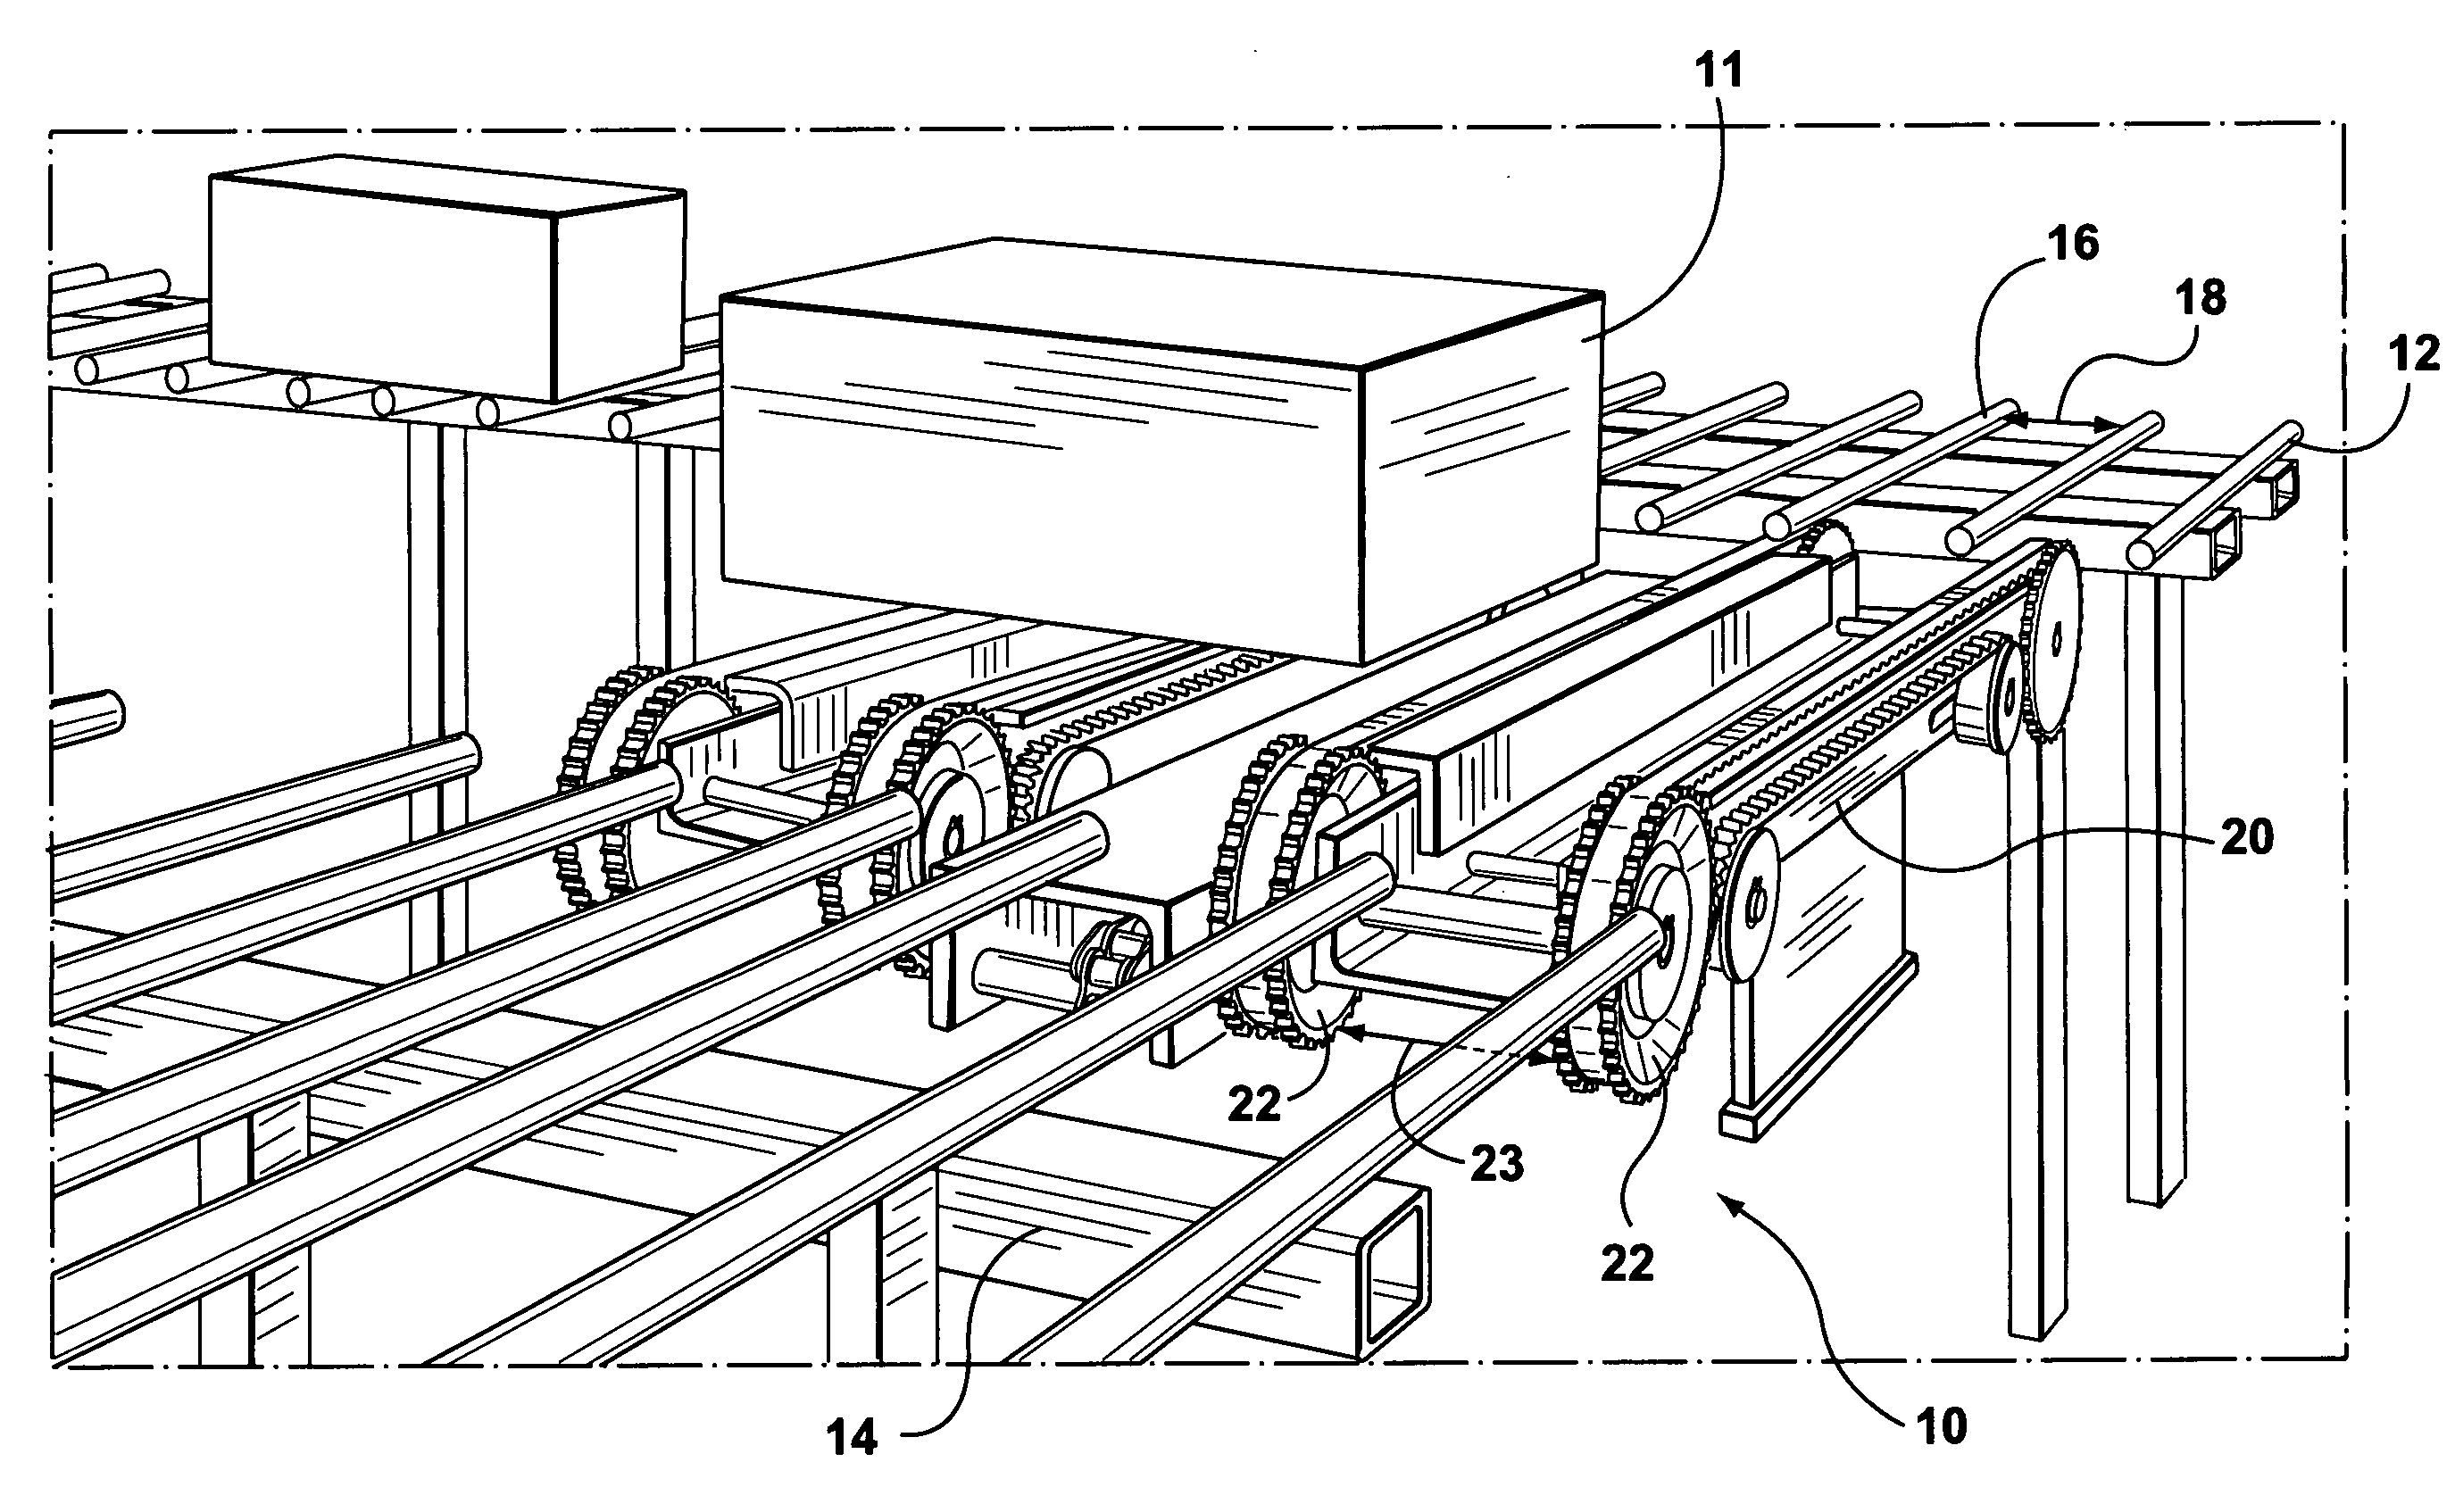 Rack, conveyor and shuttle automated pick system